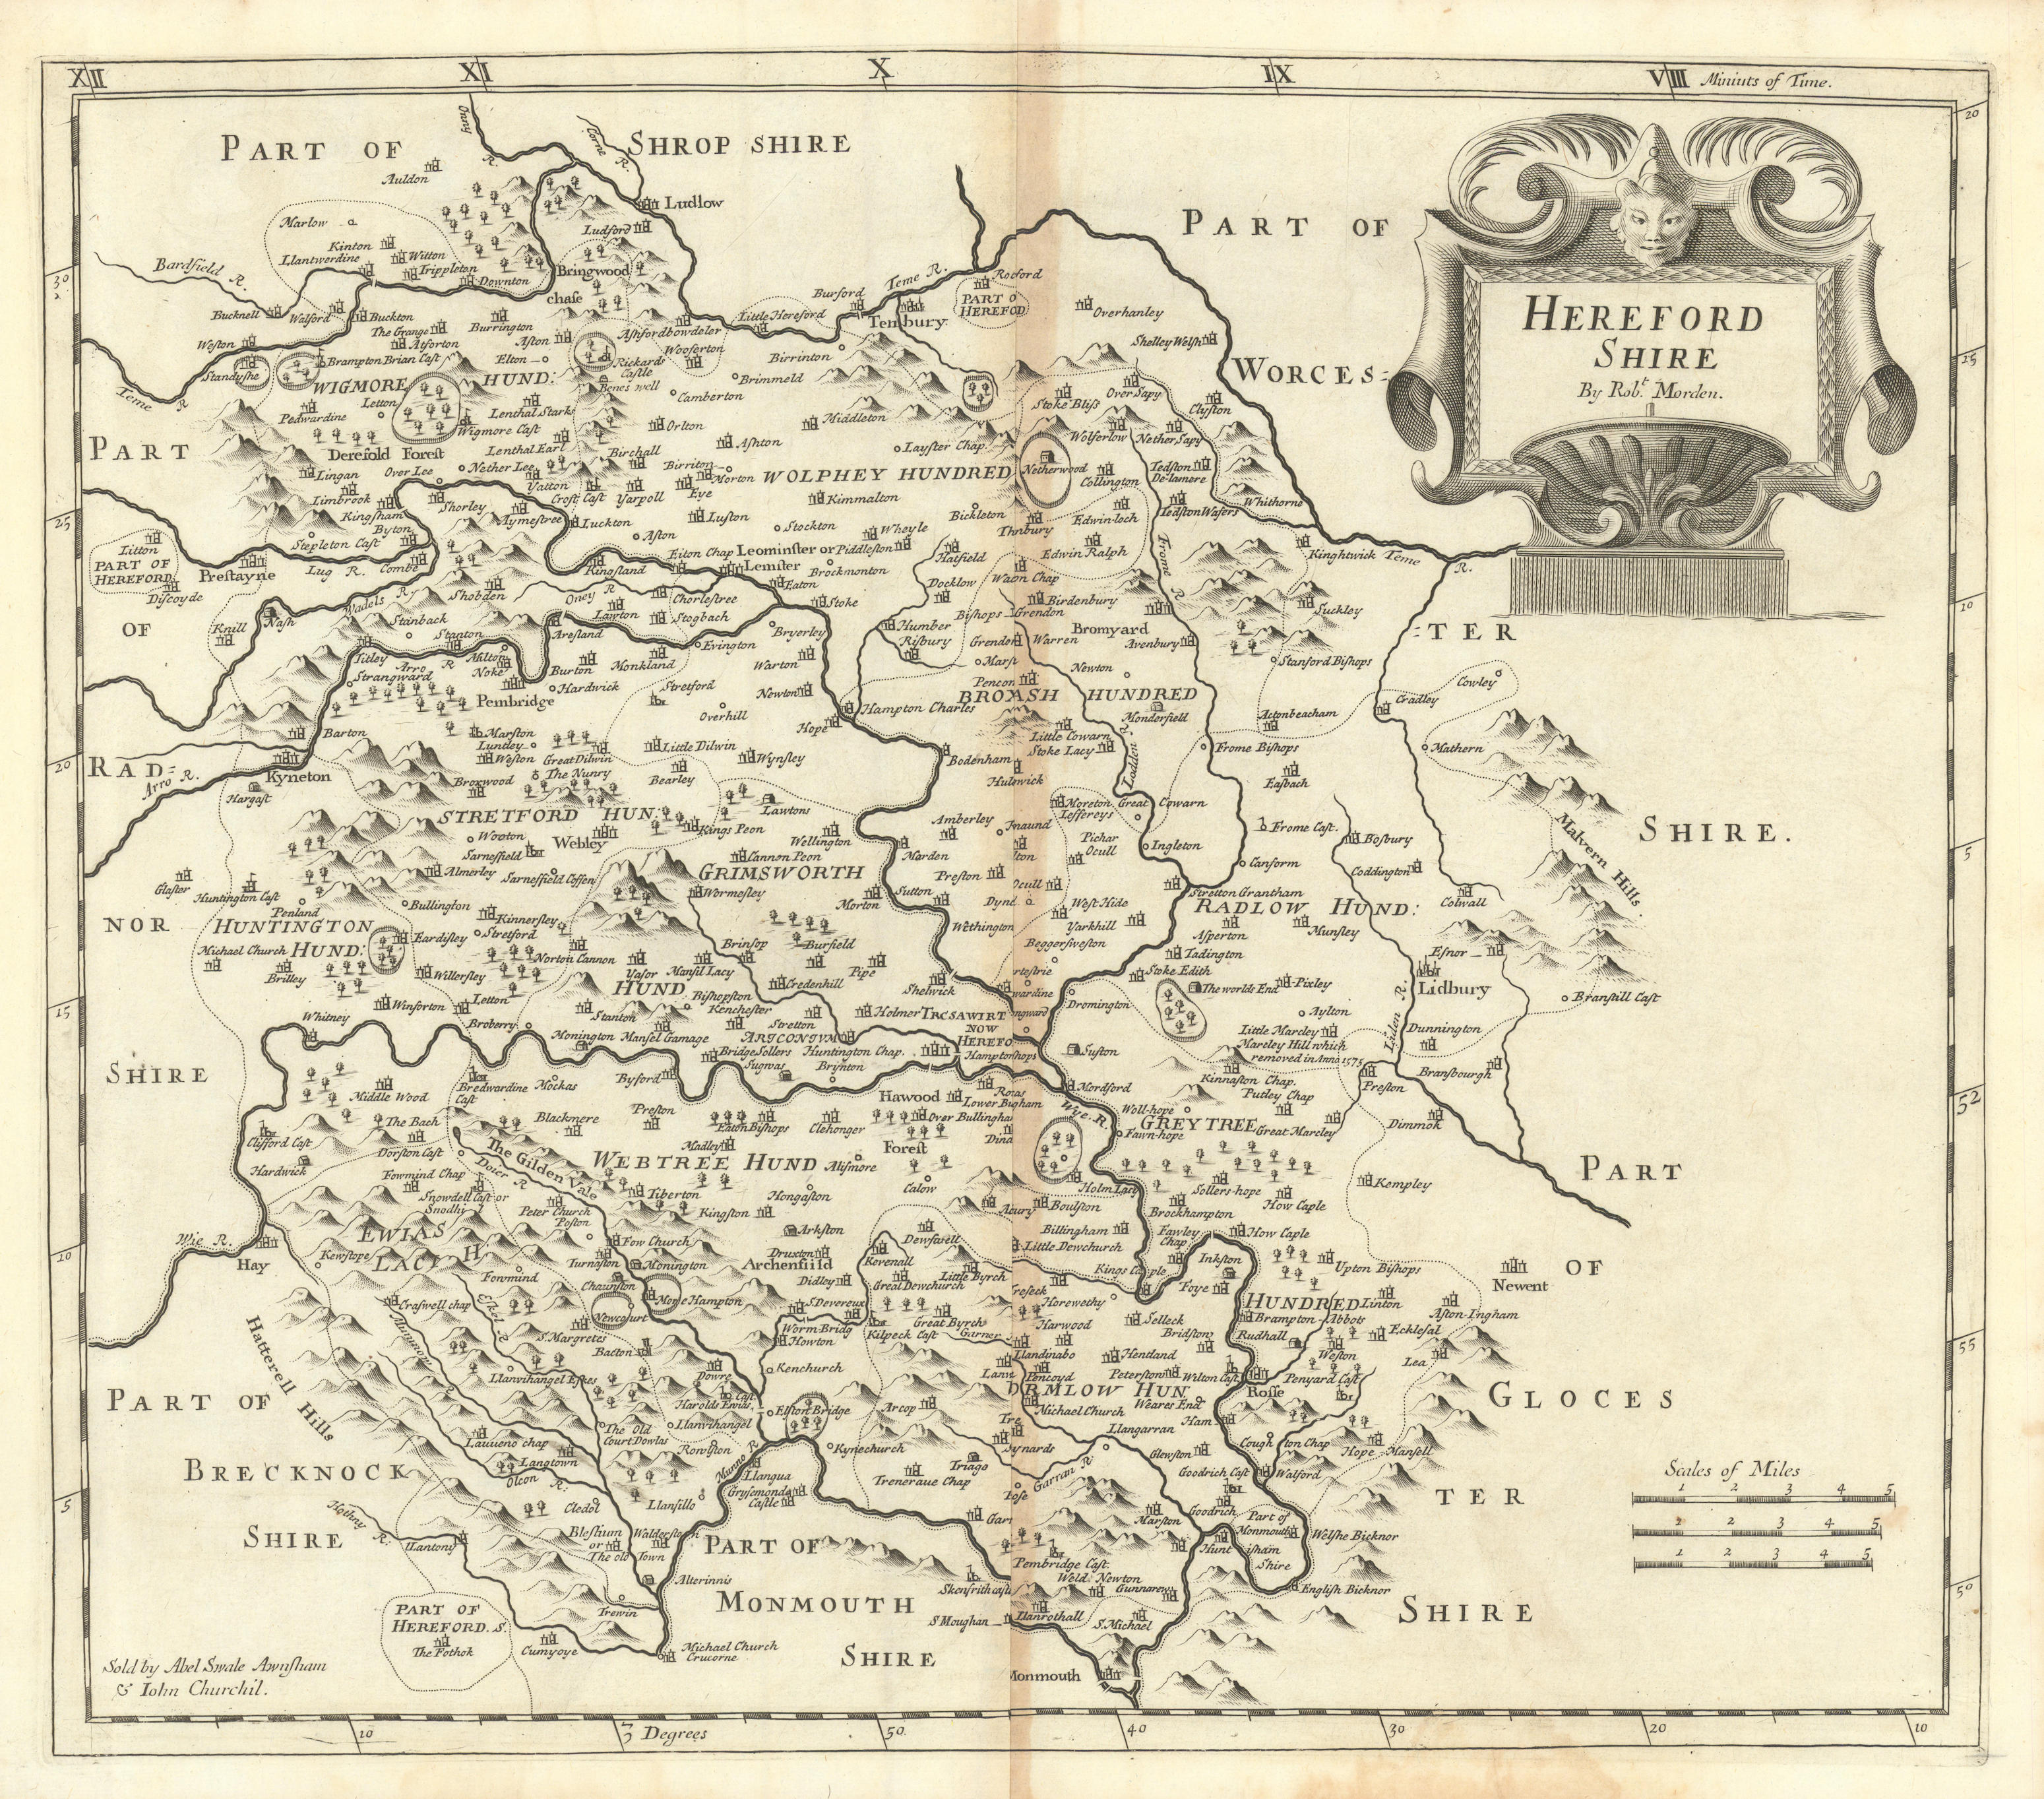 Associate Product Herefordshire. 'HEREFORD SHIRE' by ROBERT MORDEN. Camden's Britannia 1695 map